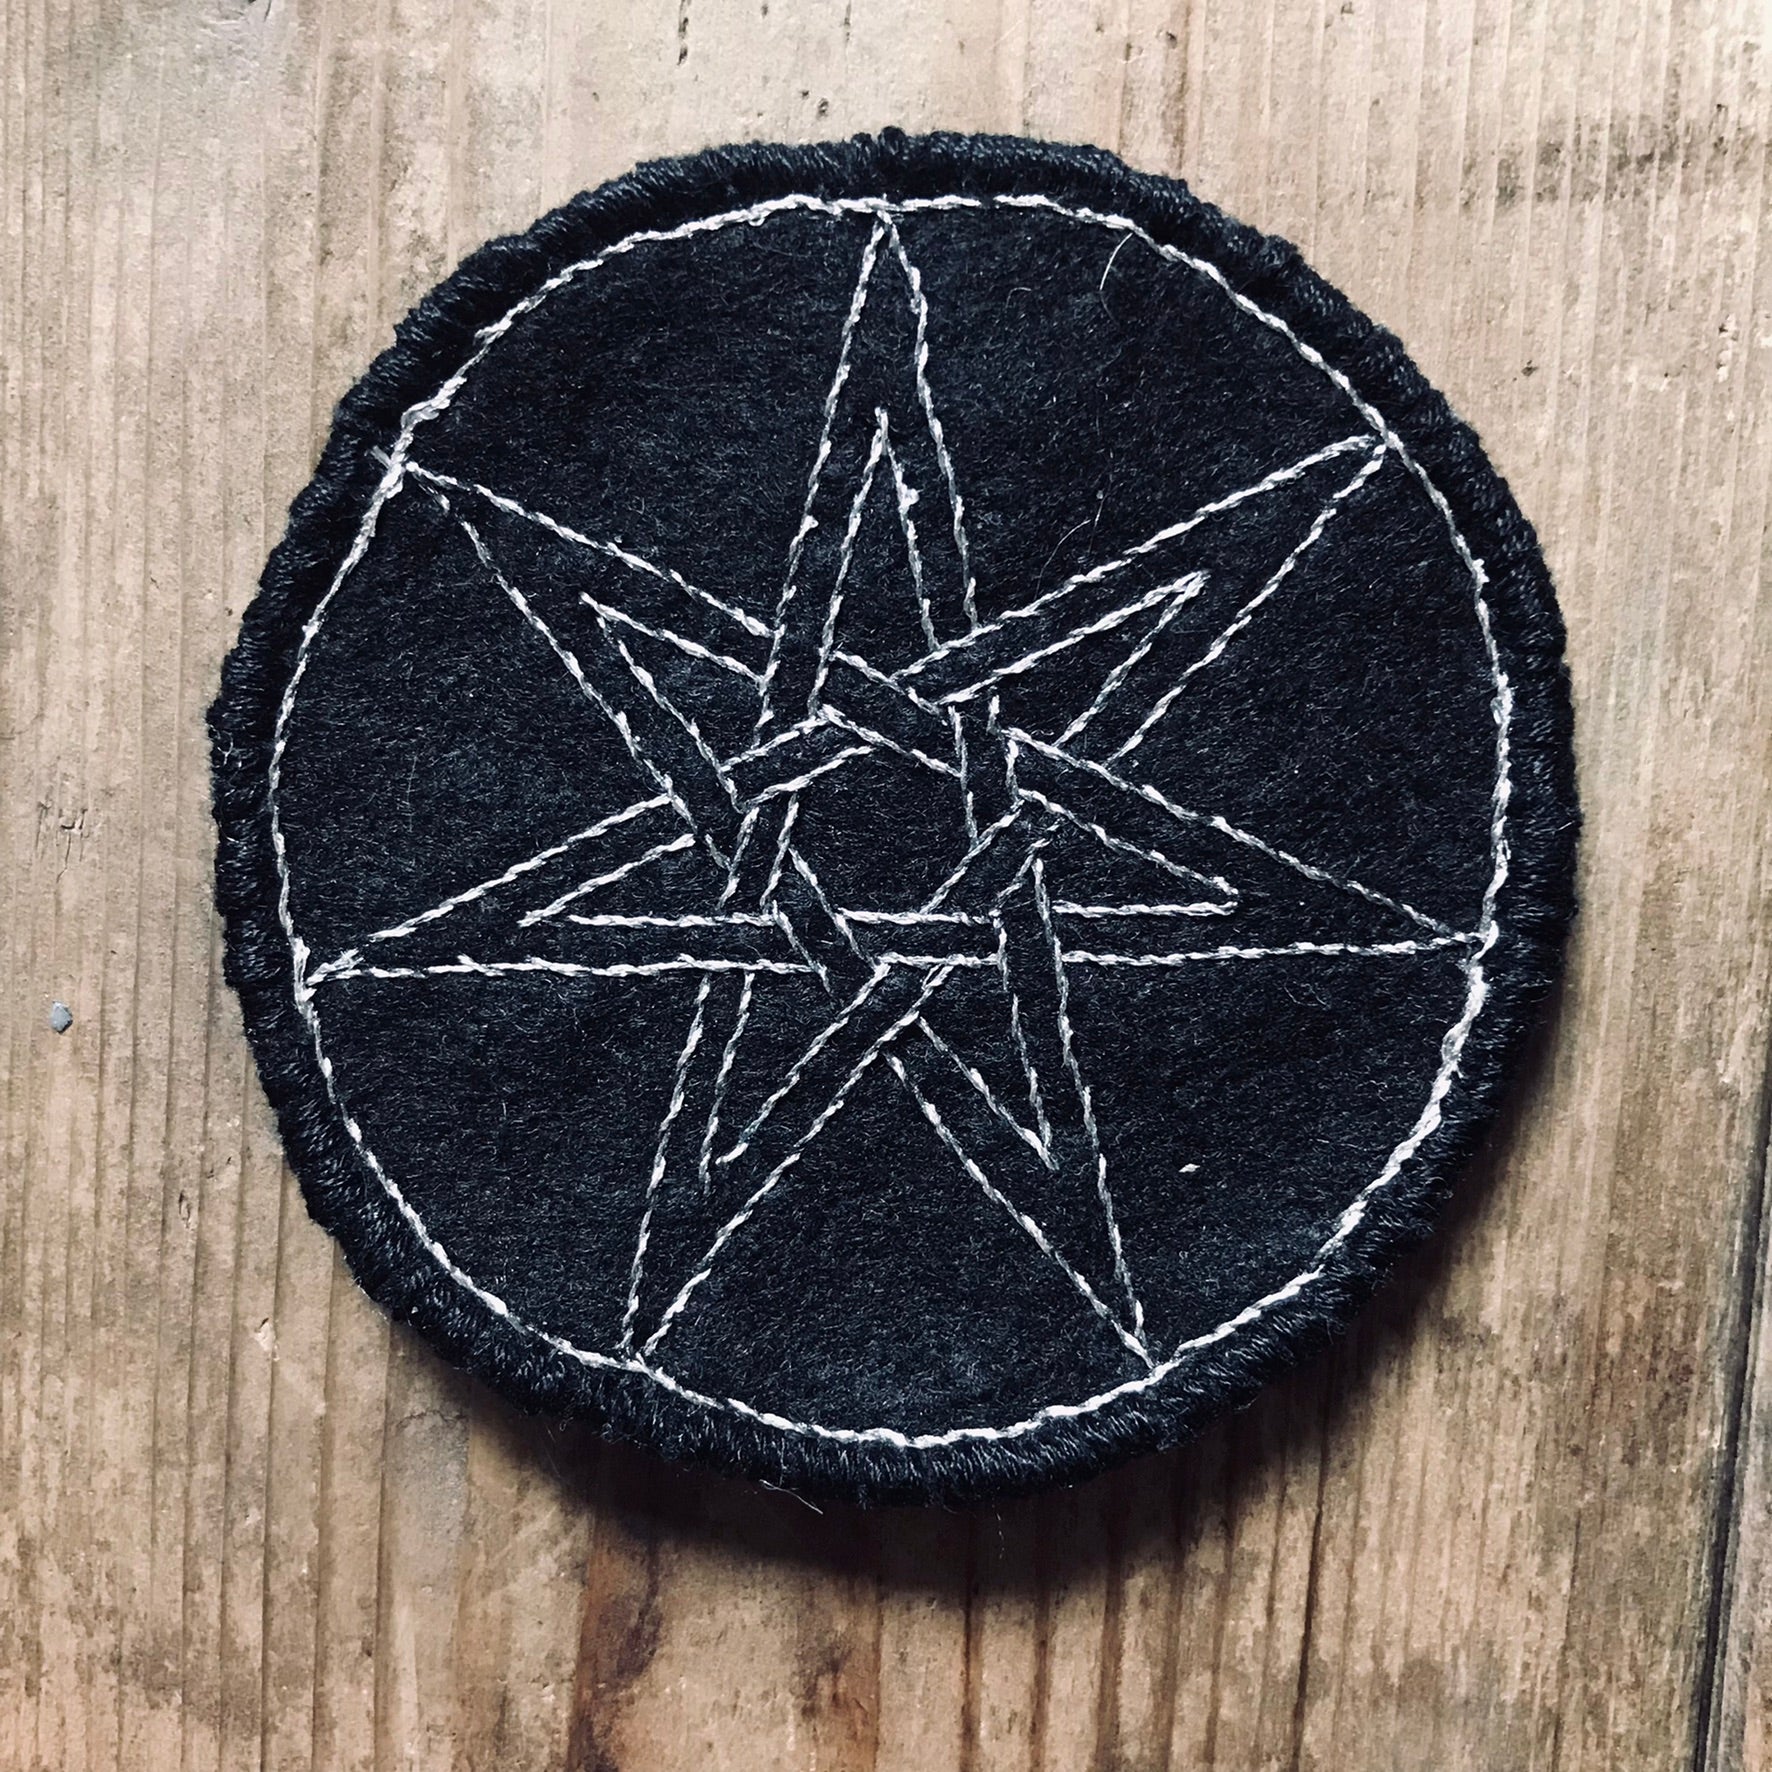 FAERIE STAR, BLACK FELT & SILVER METAL THREAD EMBROIDERED PROTECTION PATCHES, MINI TRAVEL CRYSTAL CHARGERS, ALTER PIECES